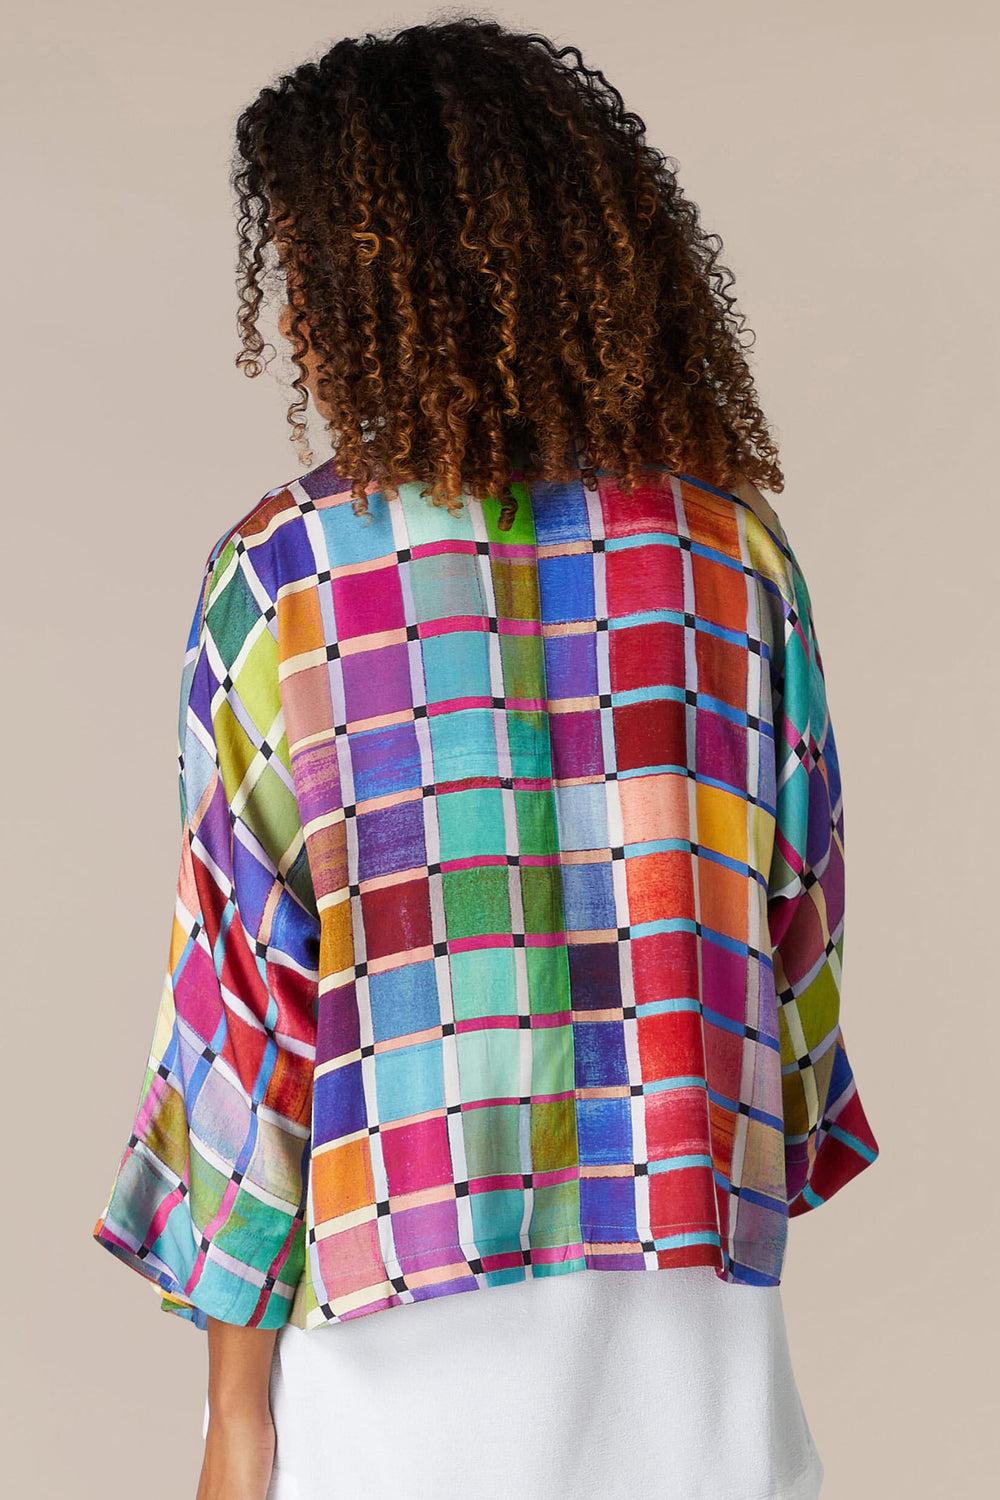 Sahara GRJ 5735 SSG Multicolour Stained Glass Printed Jacket - Shirley Allum Boutique